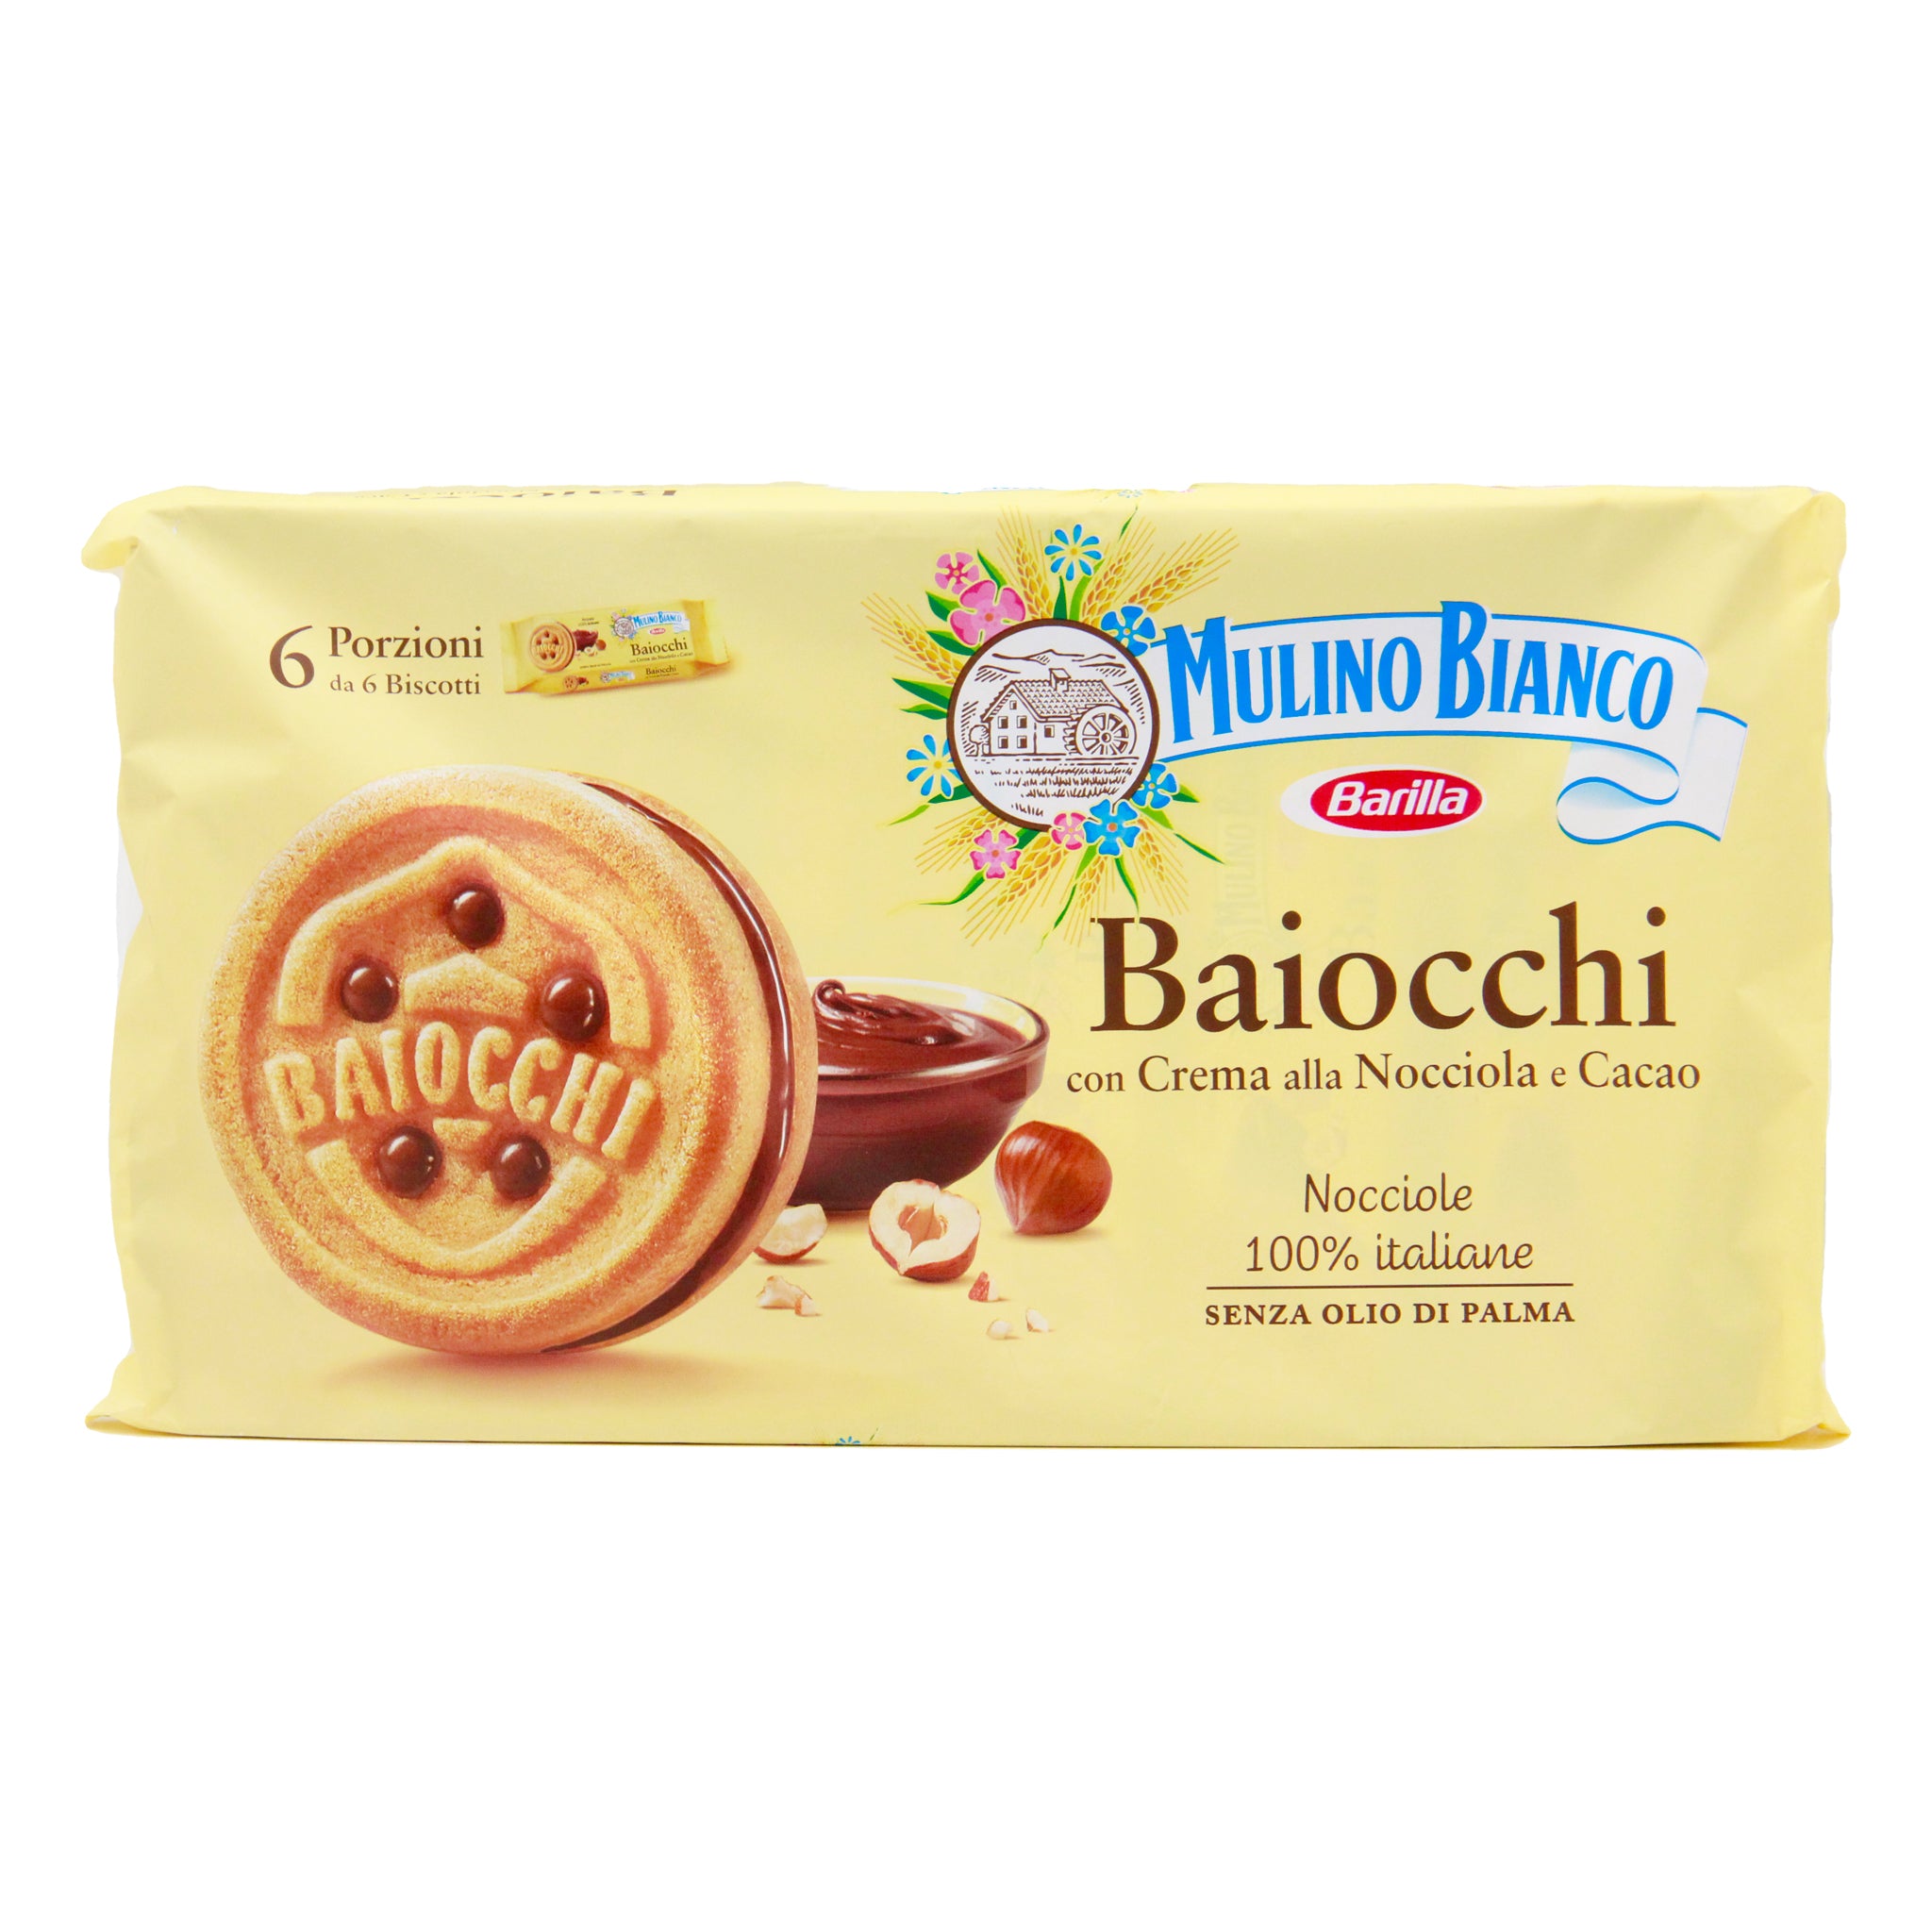 Baiocchi Biscuit – Stable Trading Limited